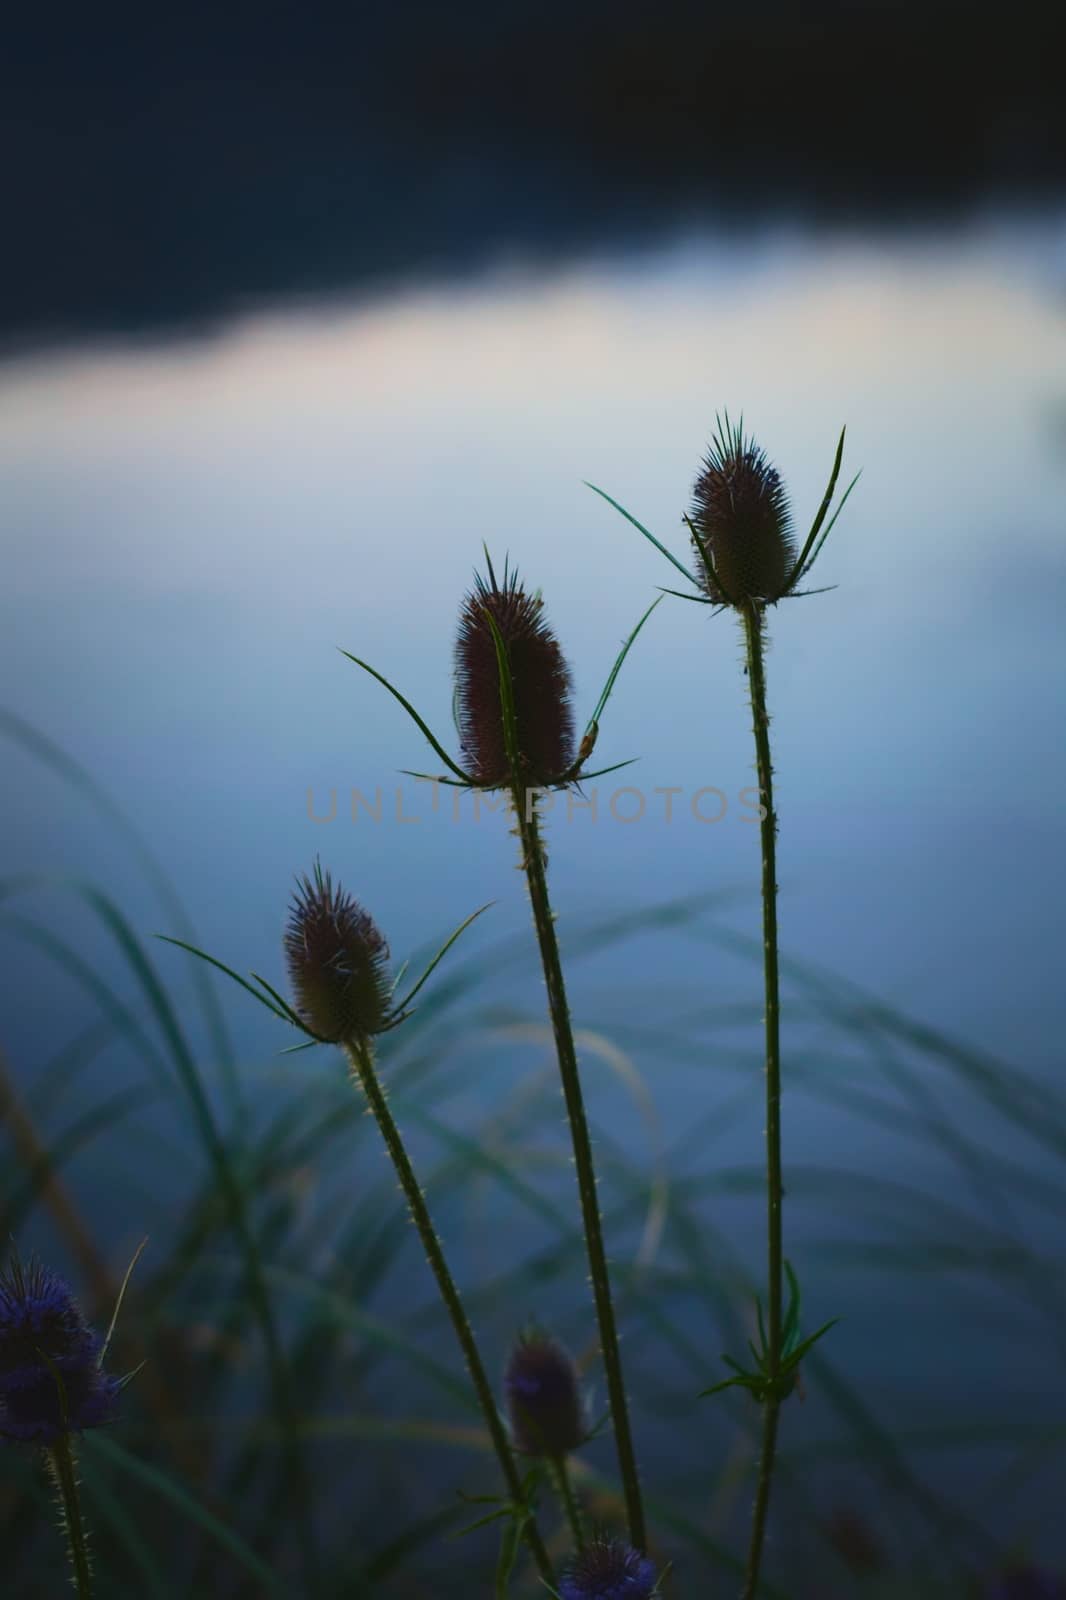 Thistles and long grass silhouetted against the reflections of the twilight sky on the shores of a lake.